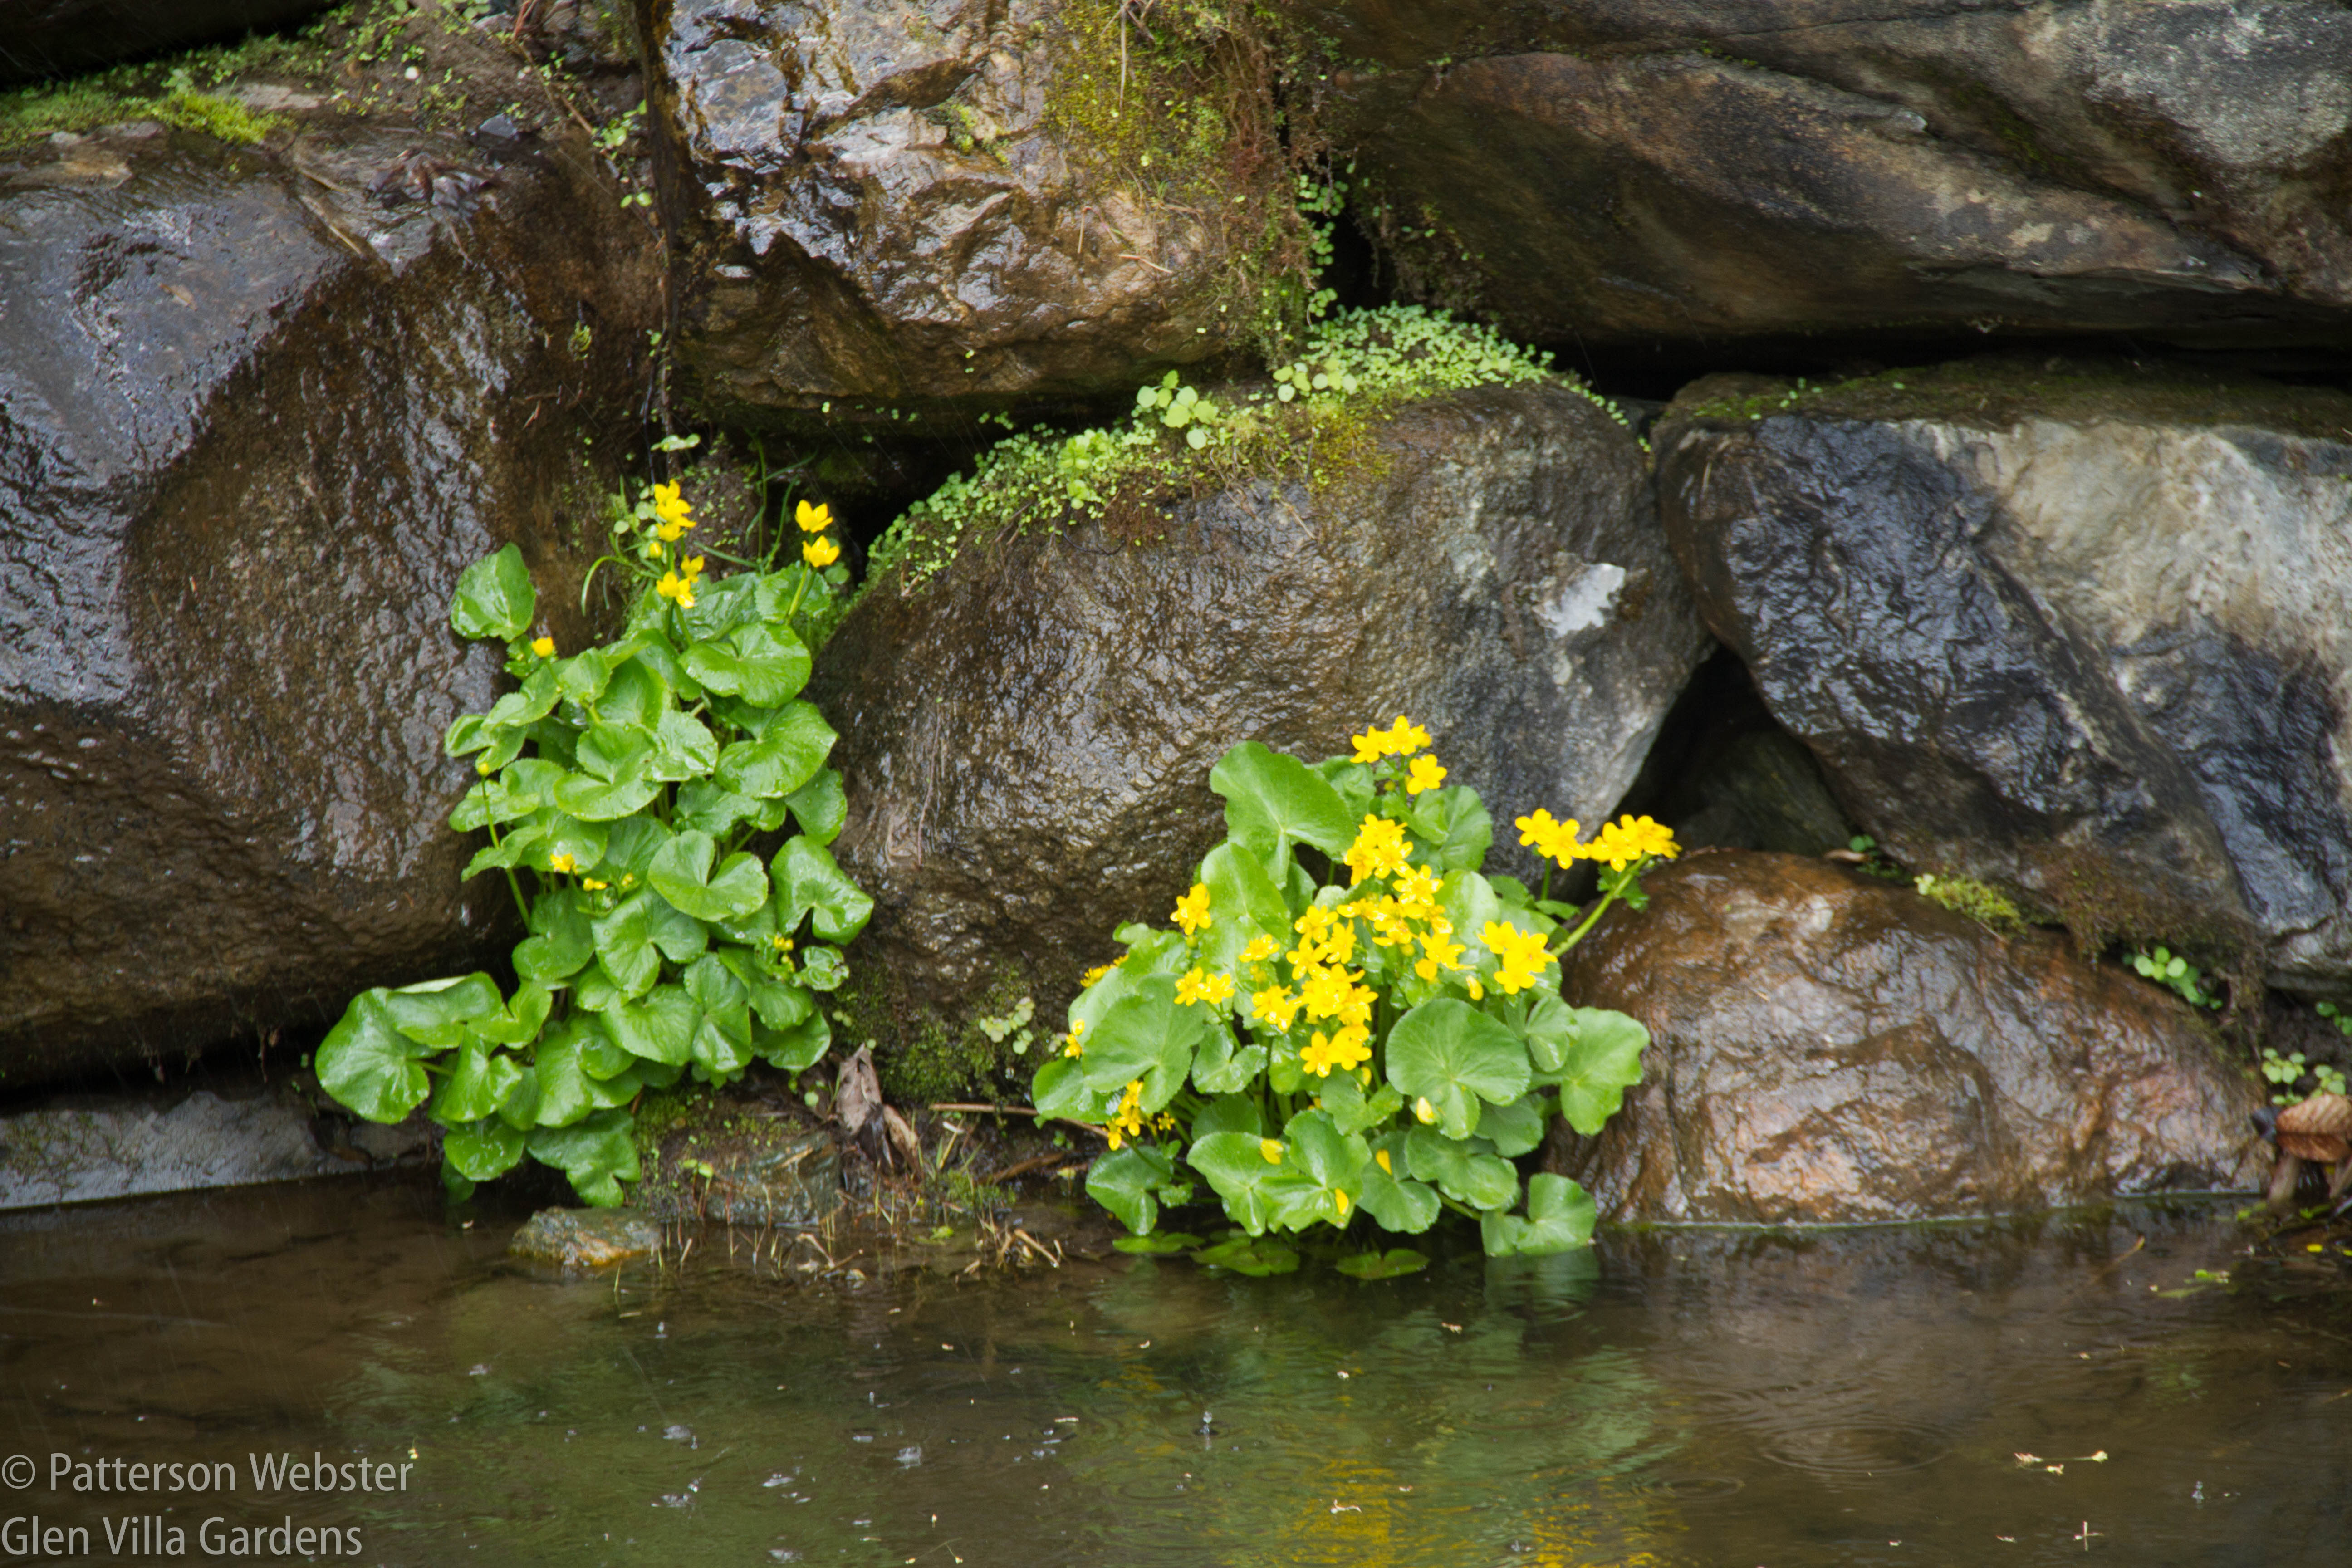 The bright yellow blossoms stand out nicely against the dark rock behind.